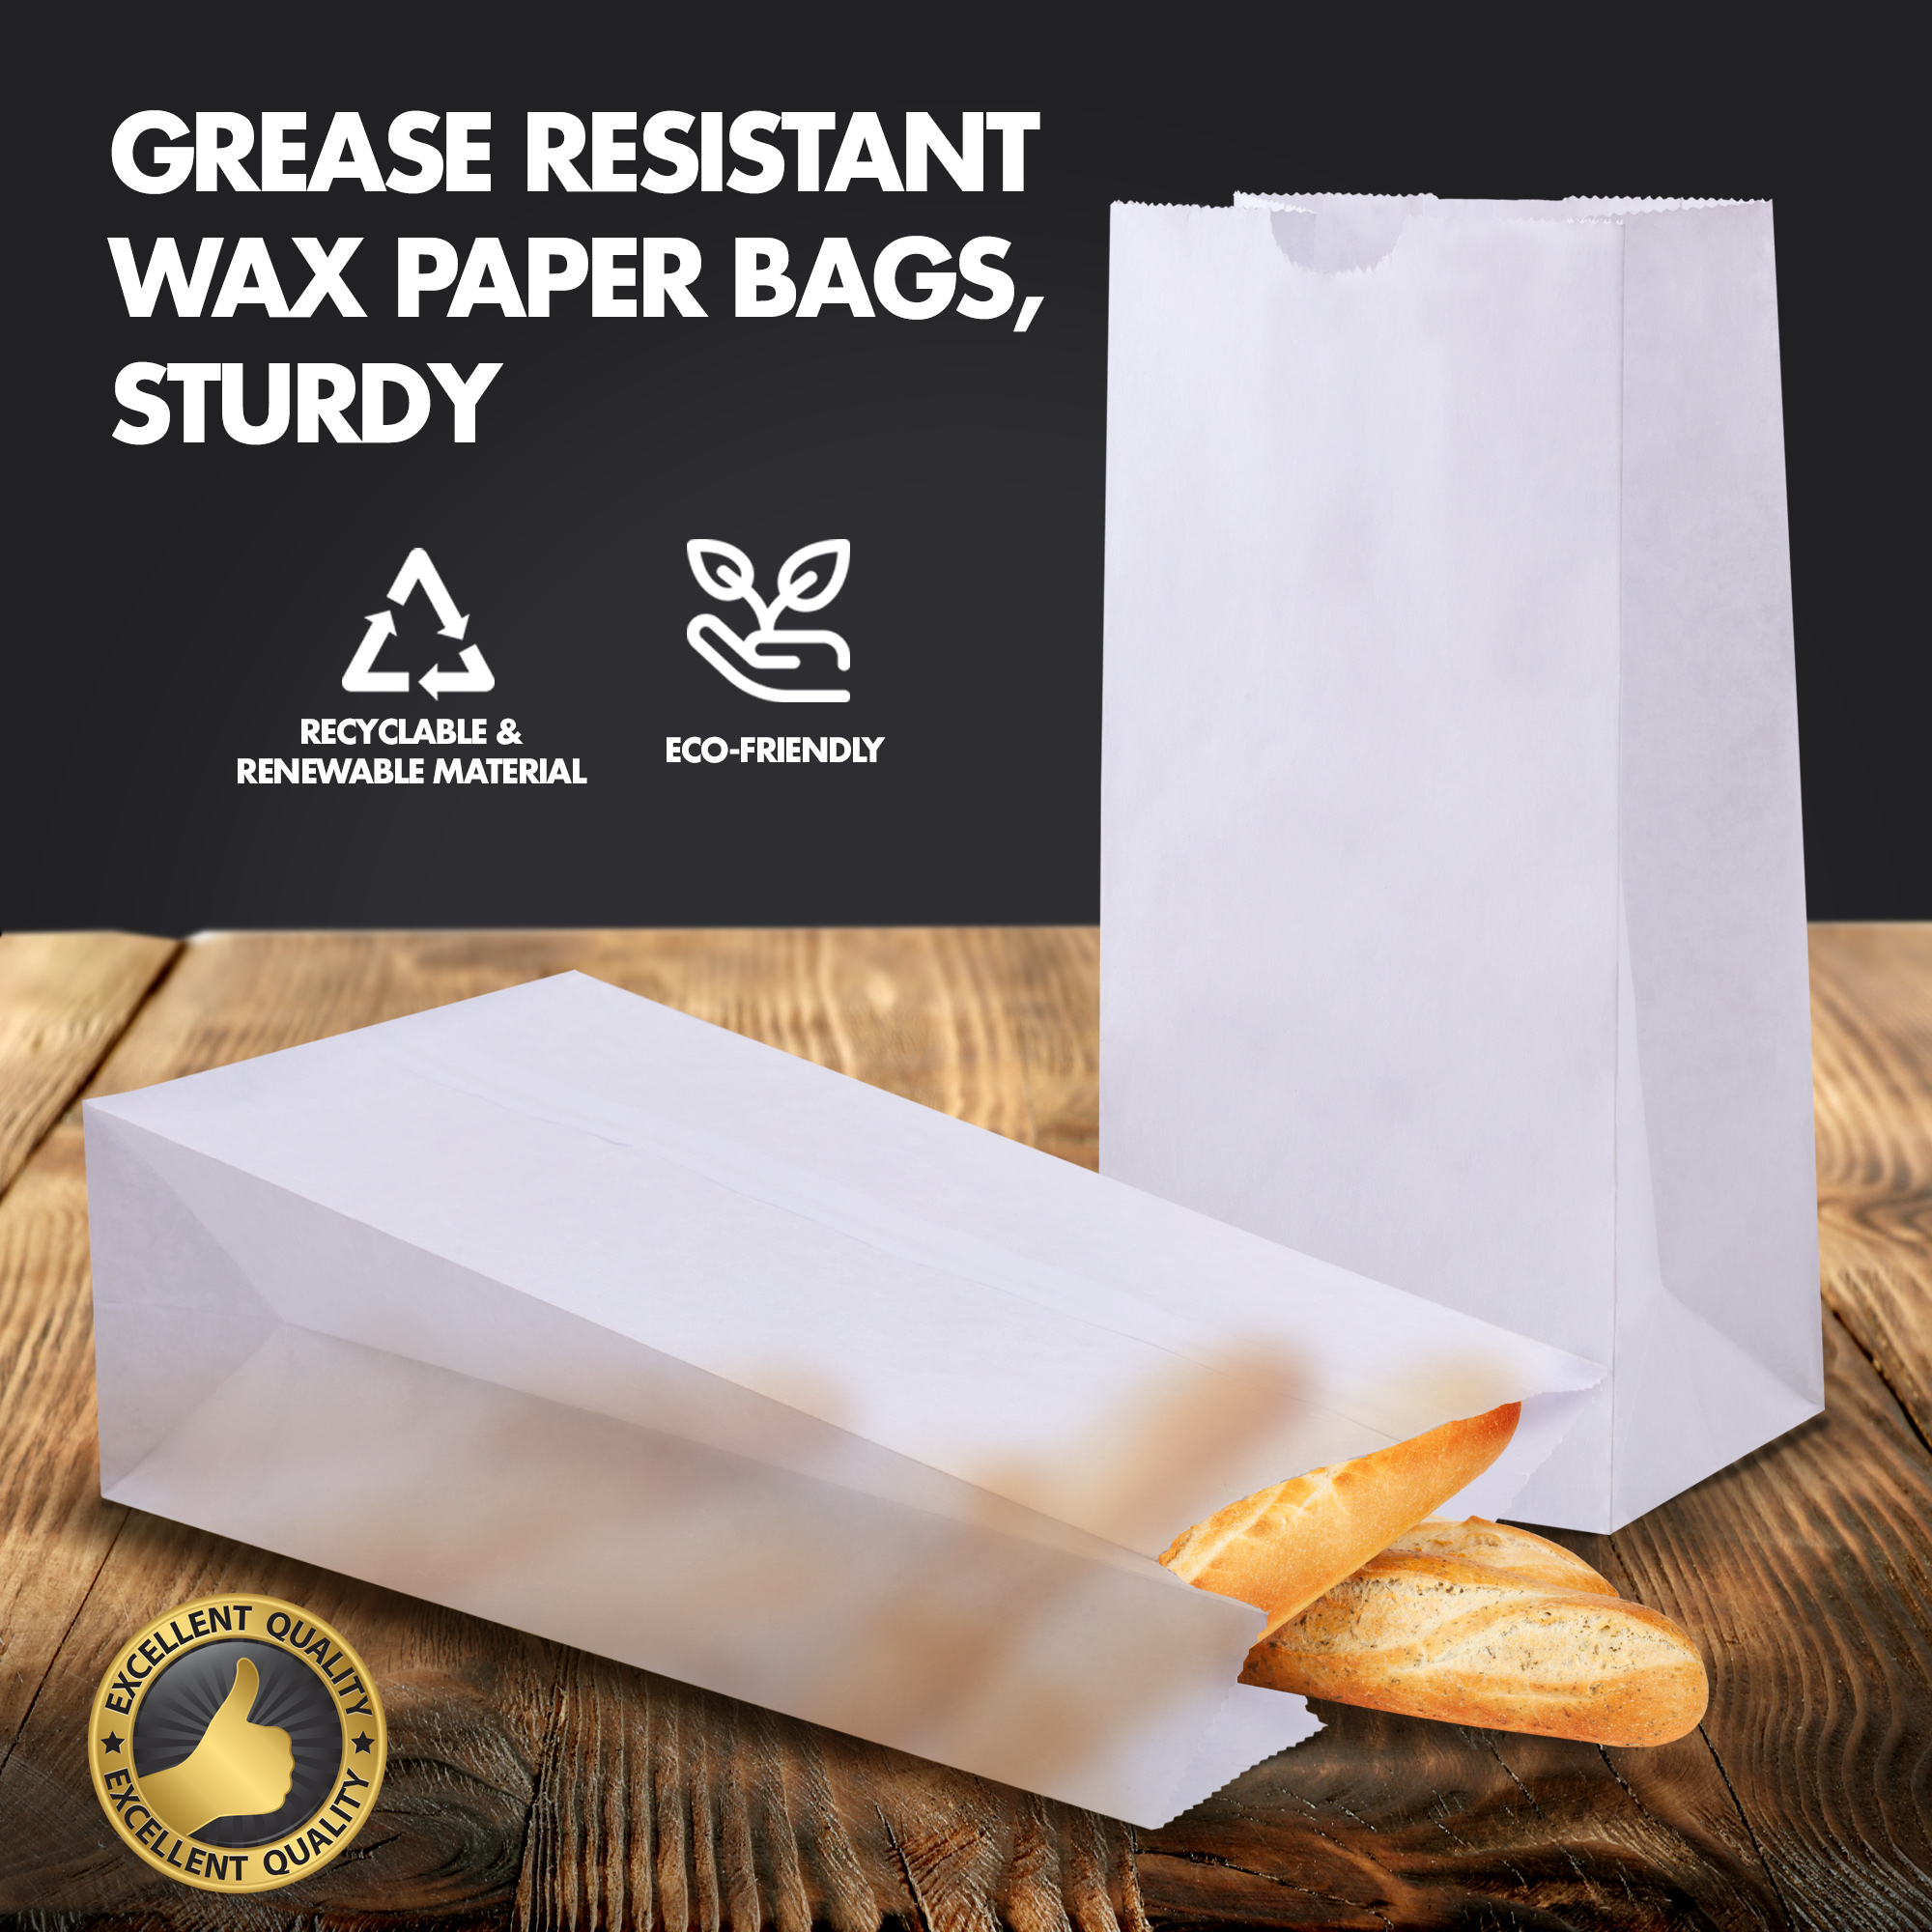 125 Pack] 4 Lb Waxed Bakery Bags - White Paper Lunch Bags